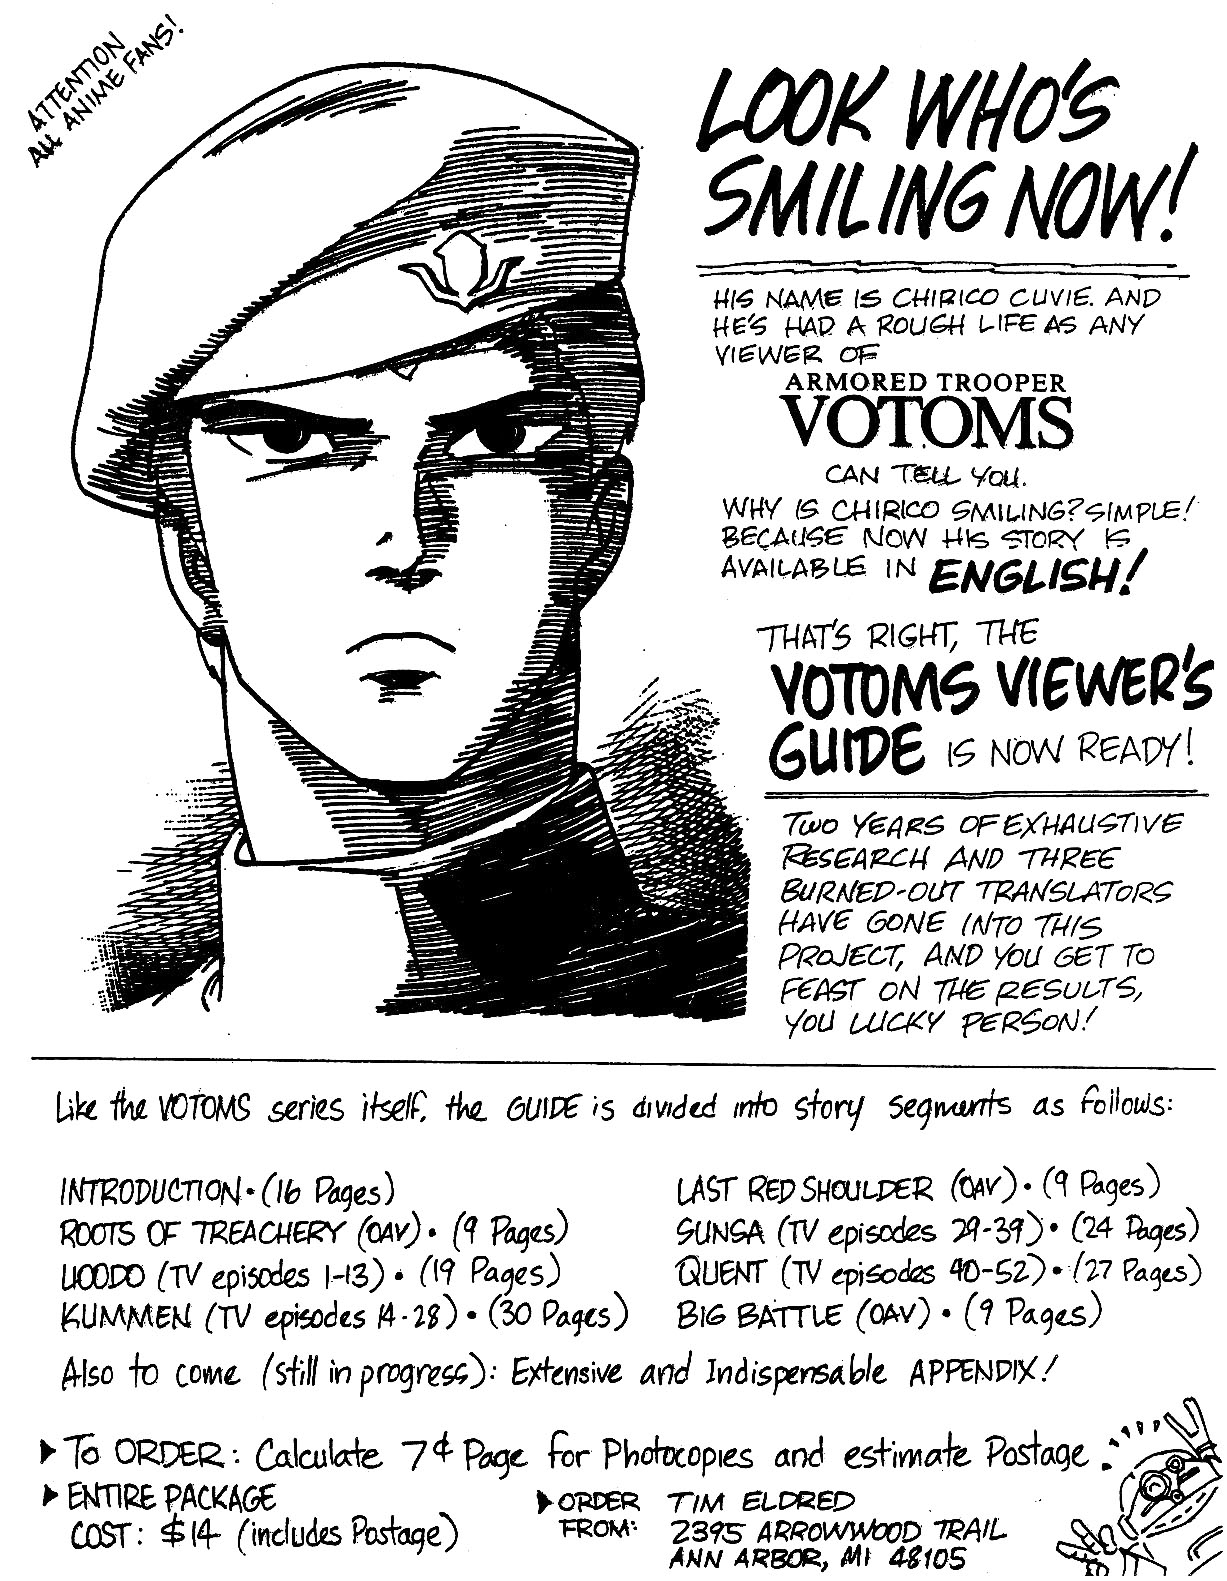 VOTOMS Viewing Guide 1